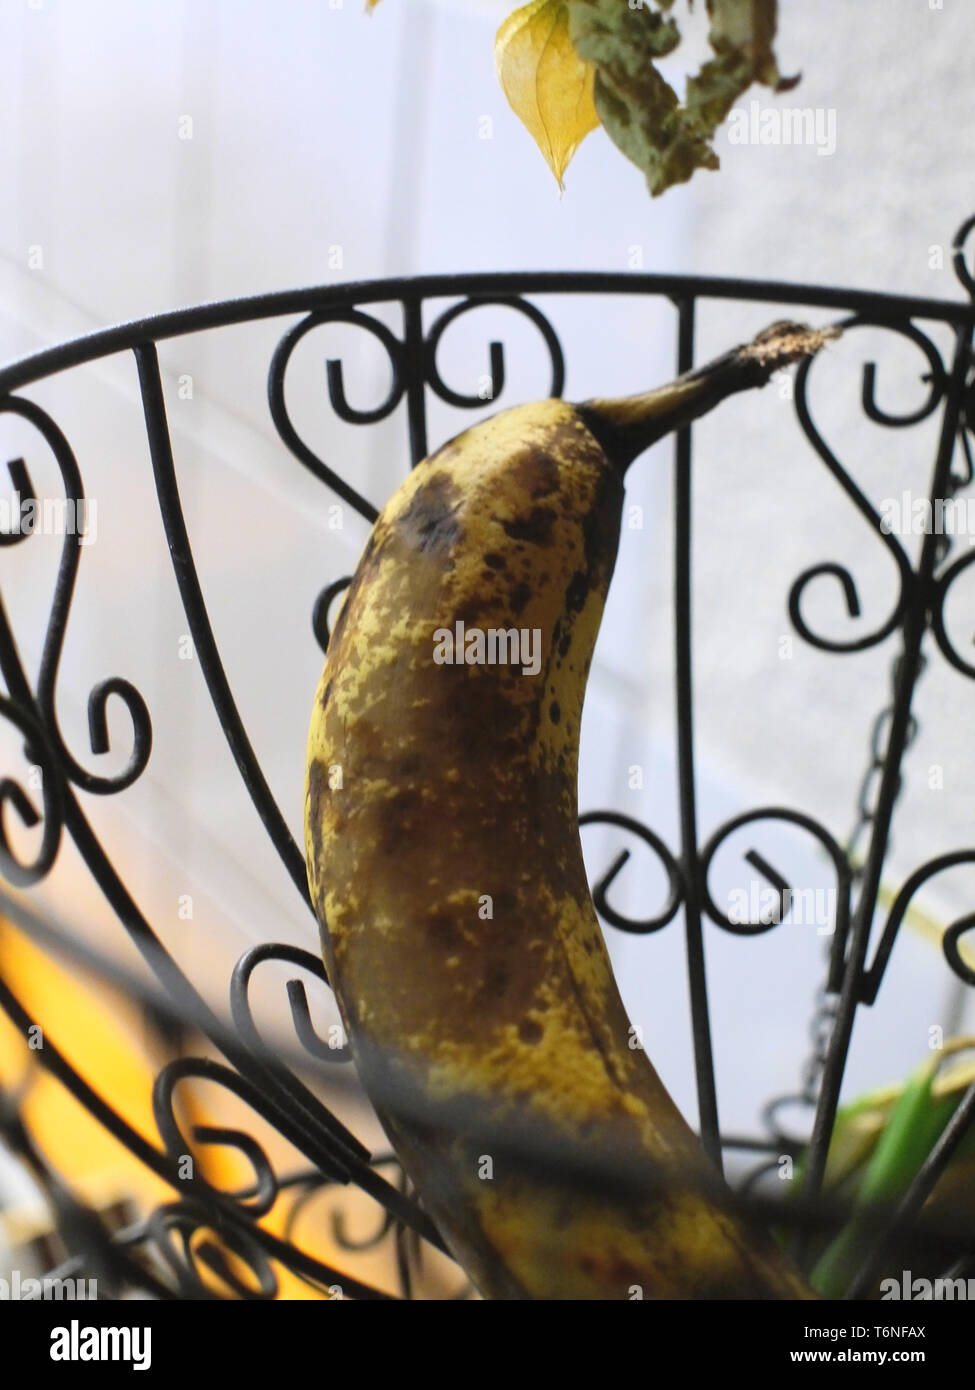 a rotted overripe black dark banana in a hanging basket Stock Photo